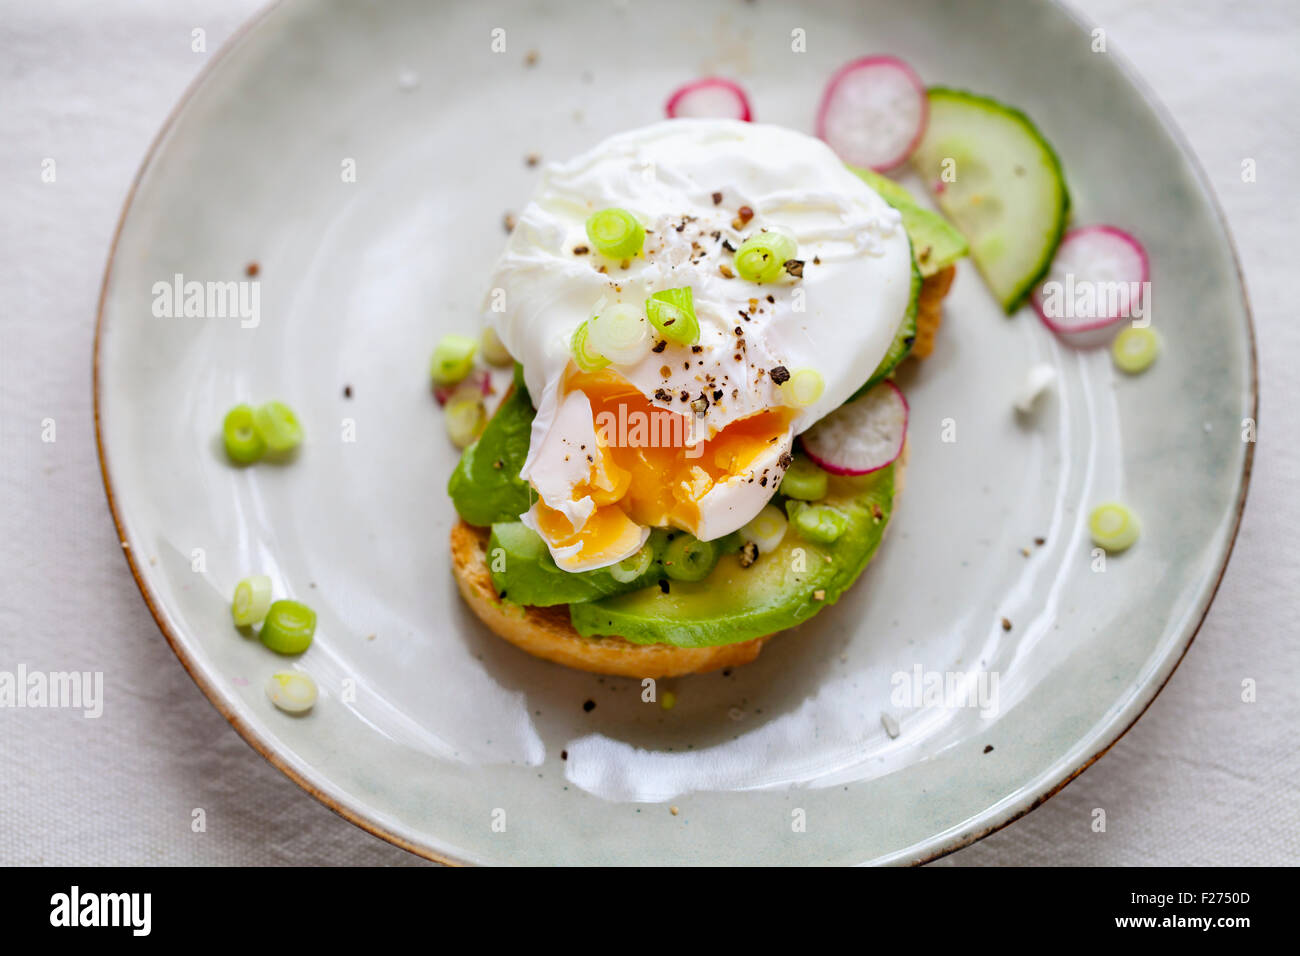 Toast with avocado and poached egg Stock Photo